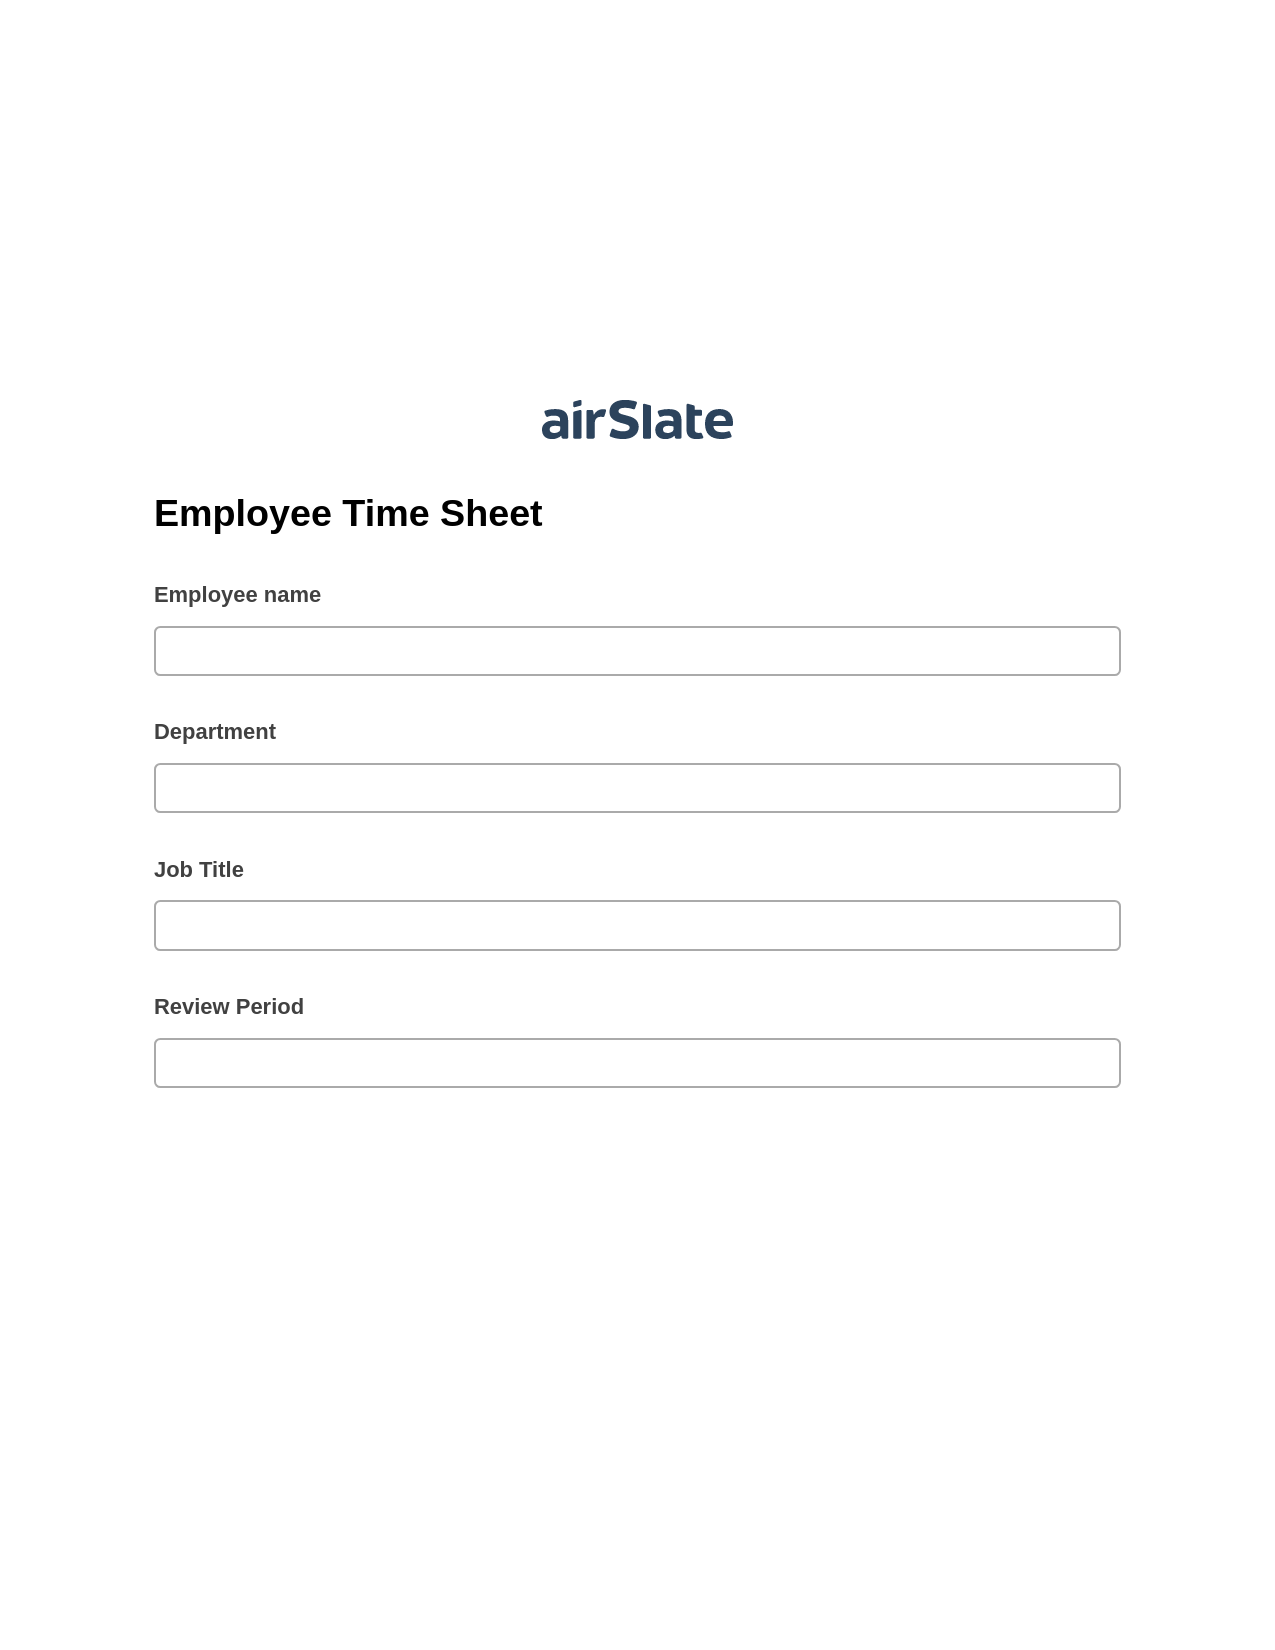 Employee Time Sheet Pre-fill from Salesforce Records with SOQL Bot, Slack Notification Bot, Export to Excel 365 Bot